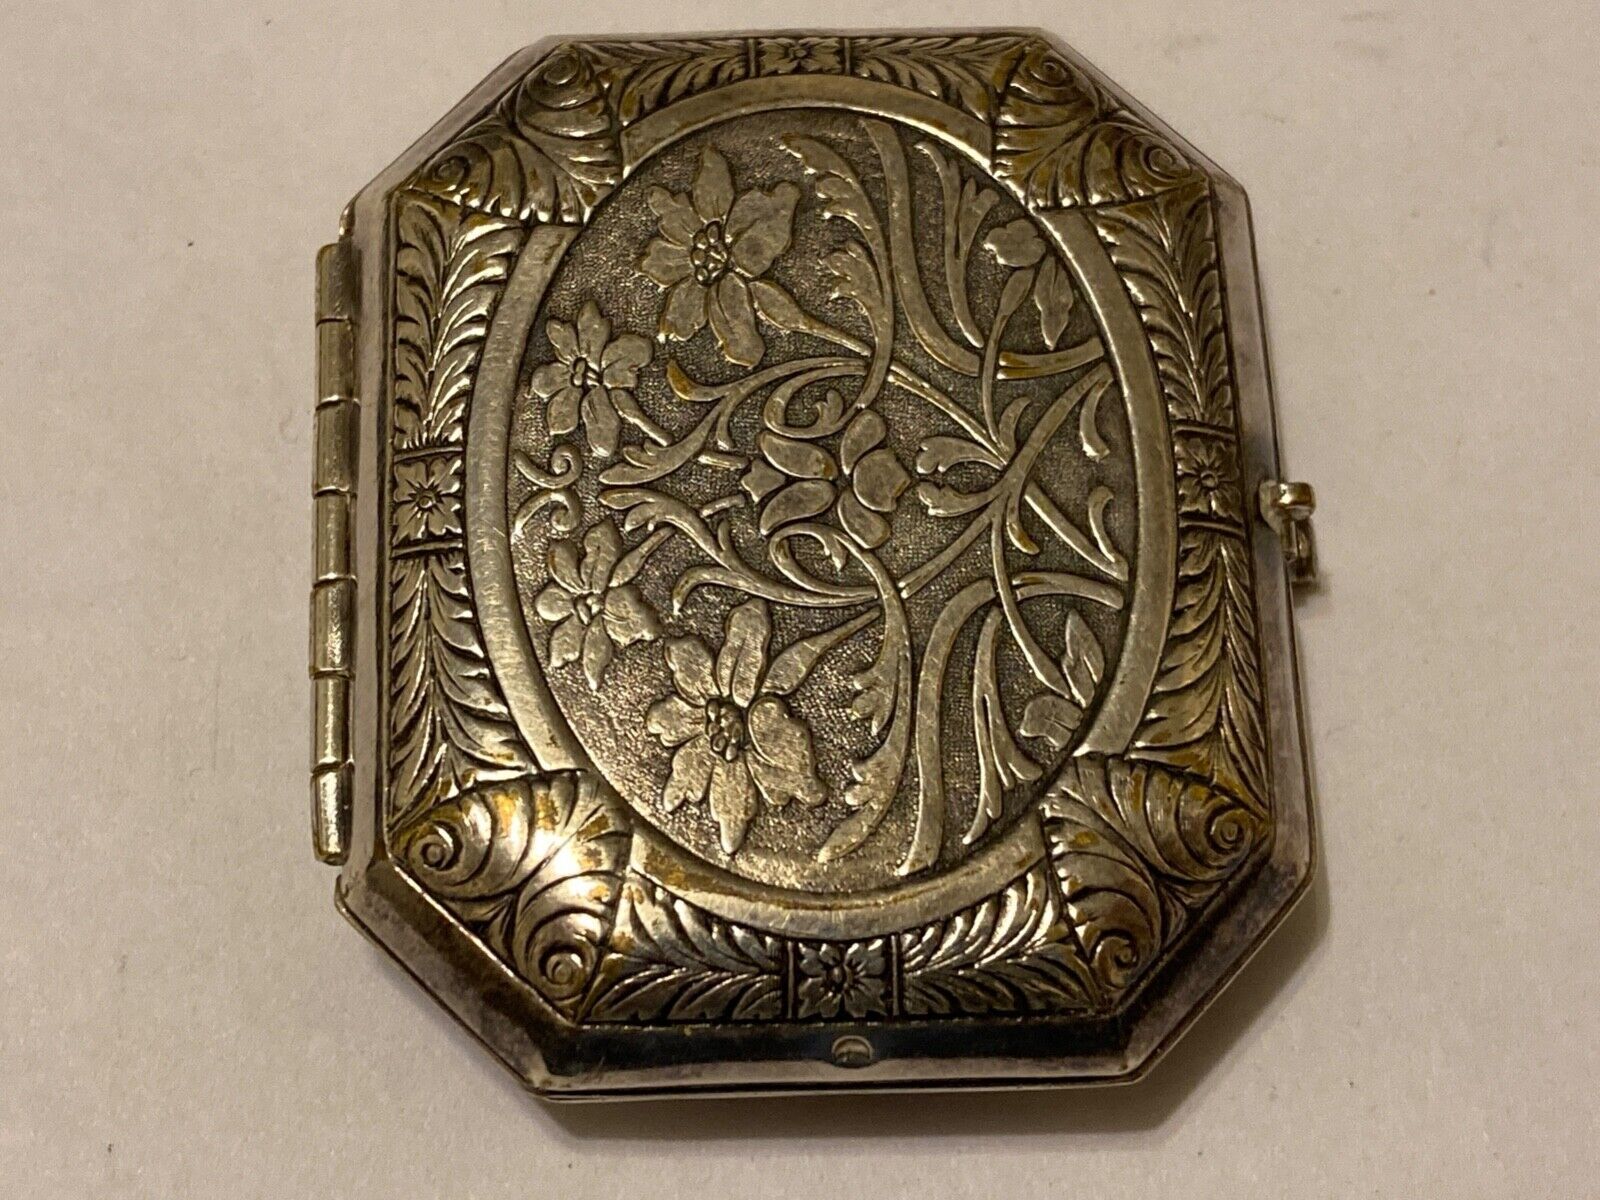 Primary image for VTG 1920s KARESS WOODWORTH ART NOUVEAU SILVER PLATED COMPACT w MIRROR ENGRAVED